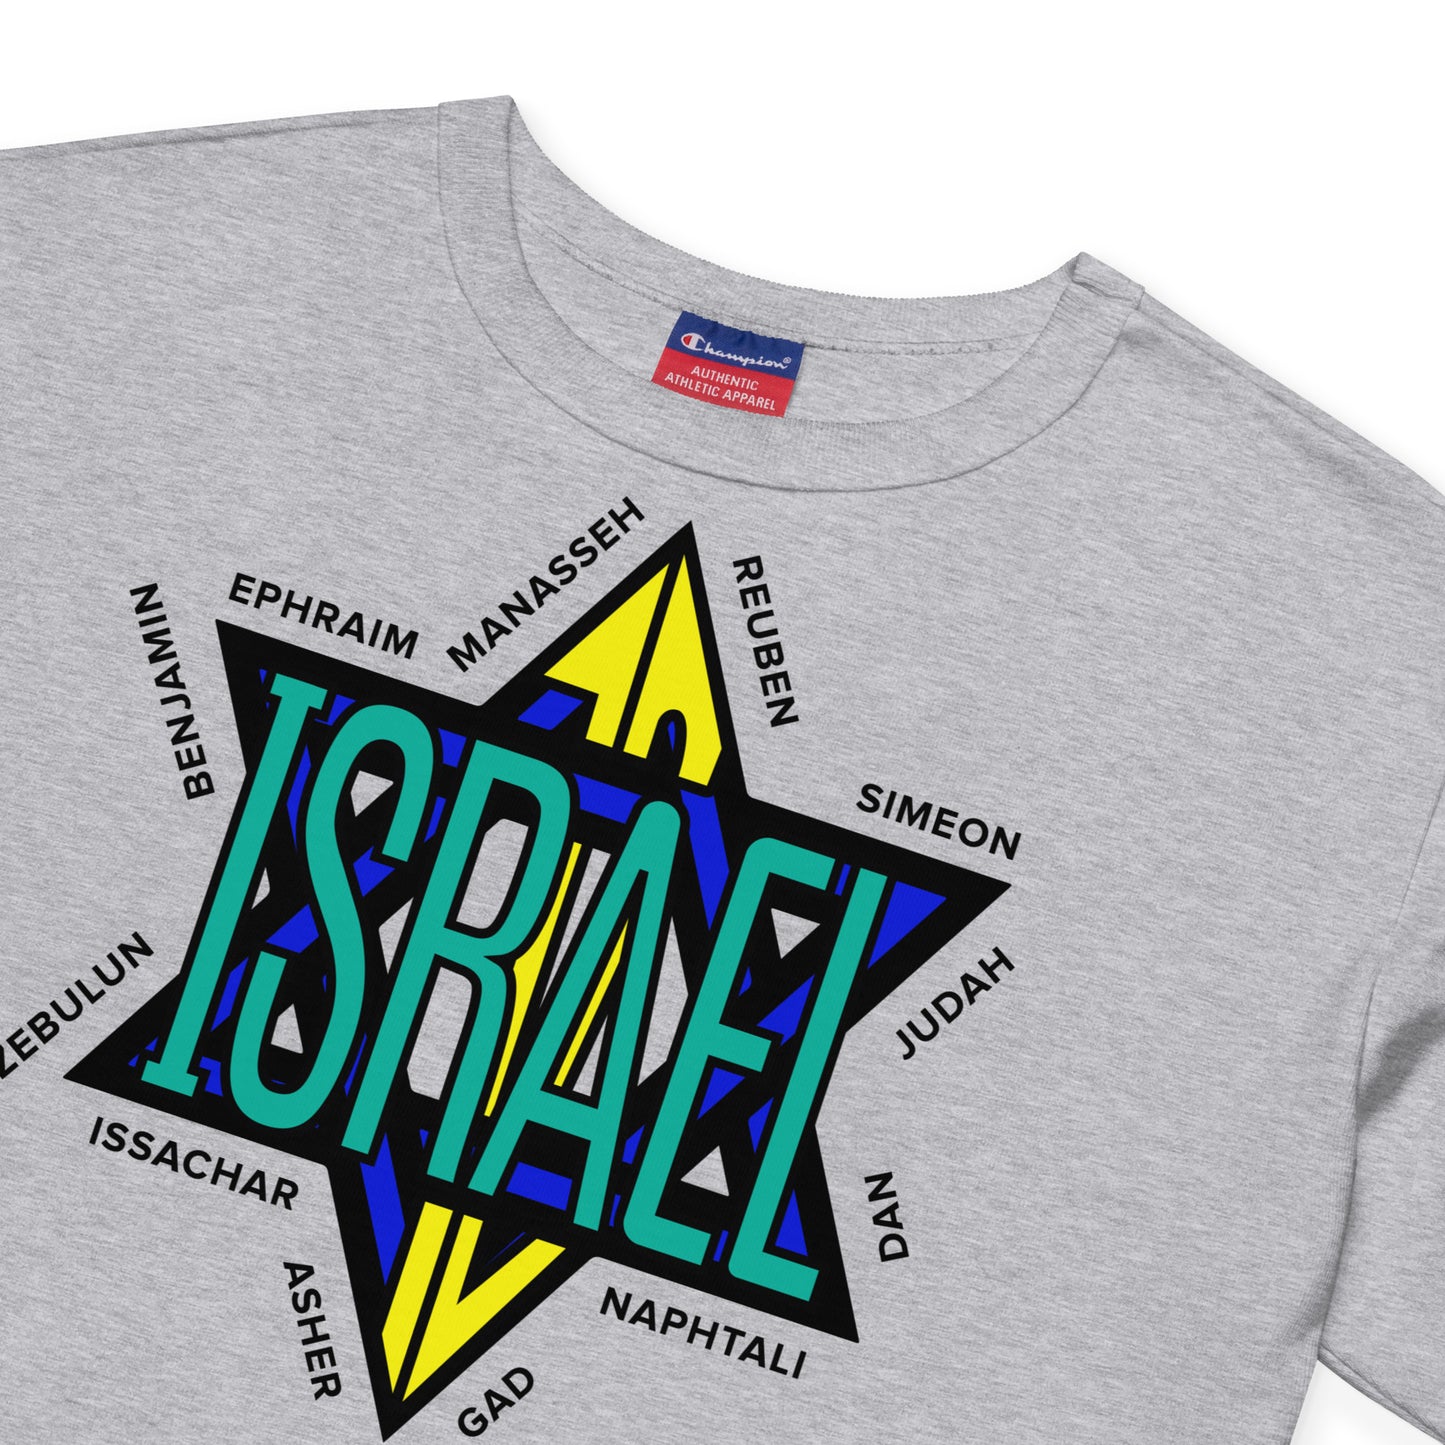 12 Tribes of Israel Champion Crop Top